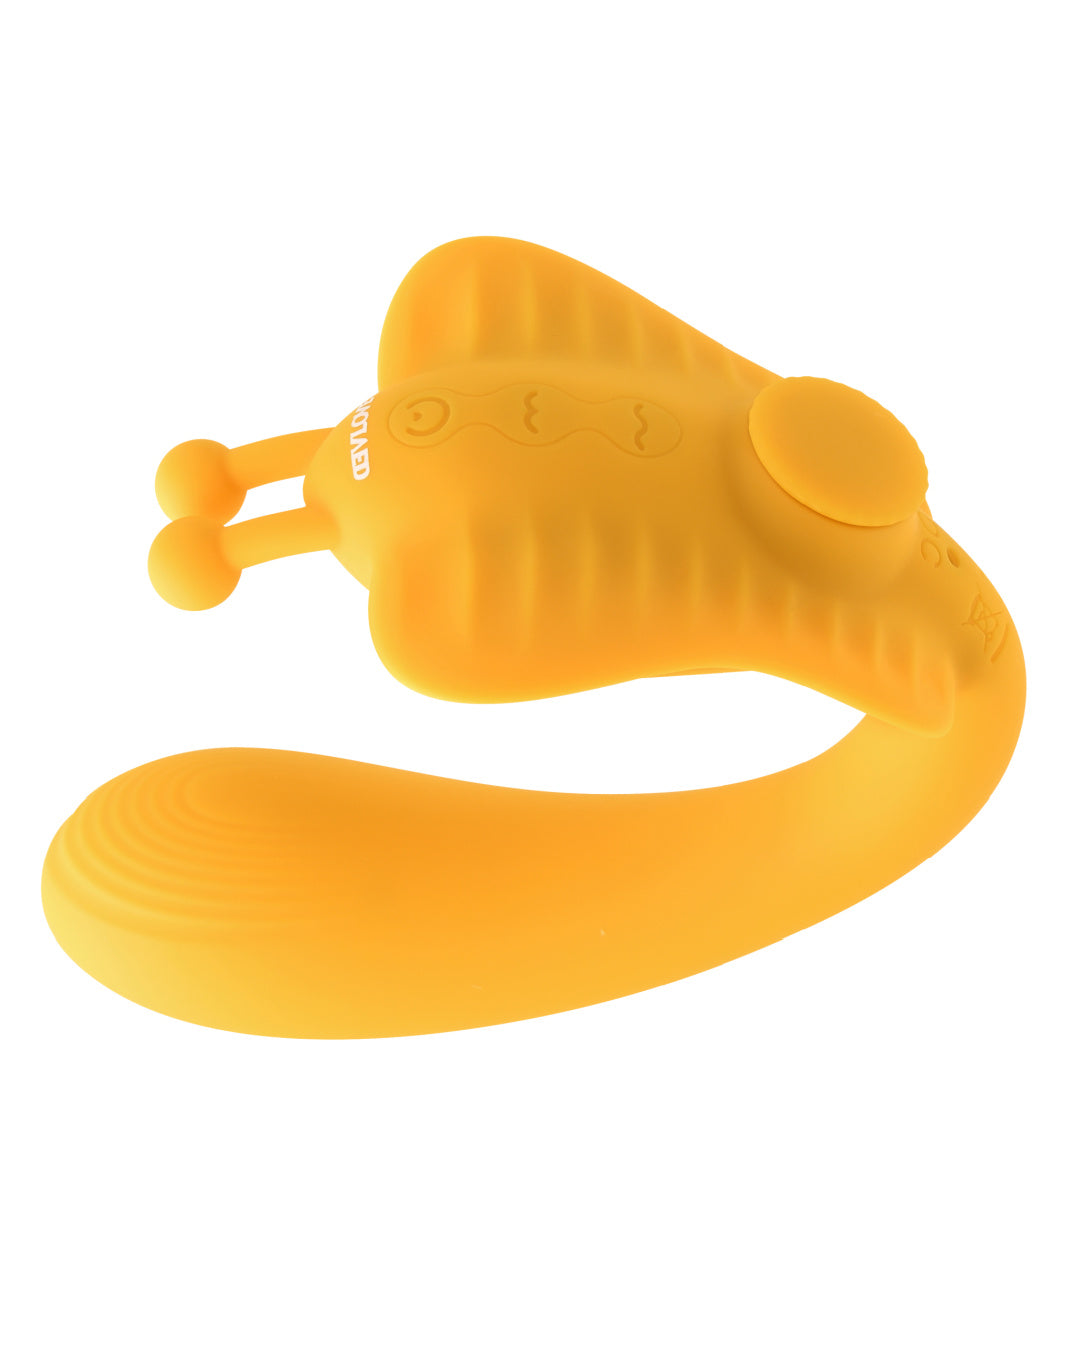 The Monarch Vibrating Double Ended Strapless Strap-on